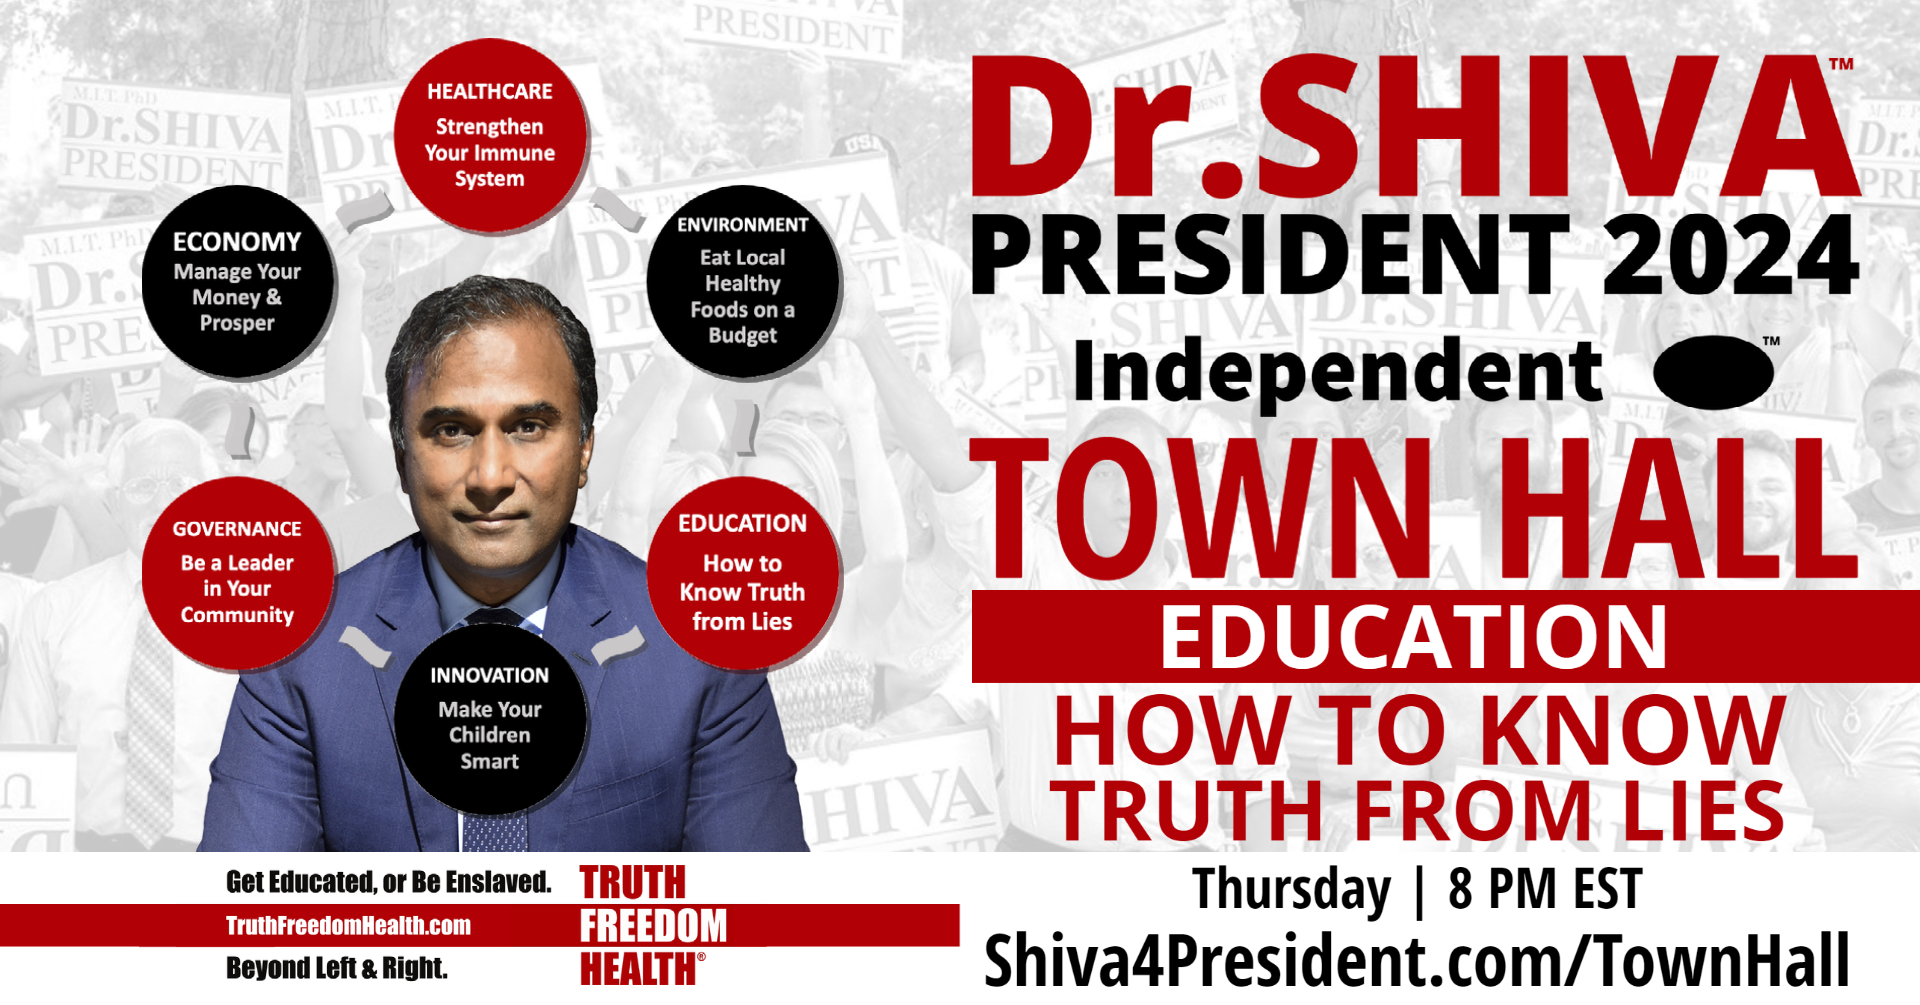 Dr.SHIVA TOWN HALL: Education - How To Tell Truth From Lies